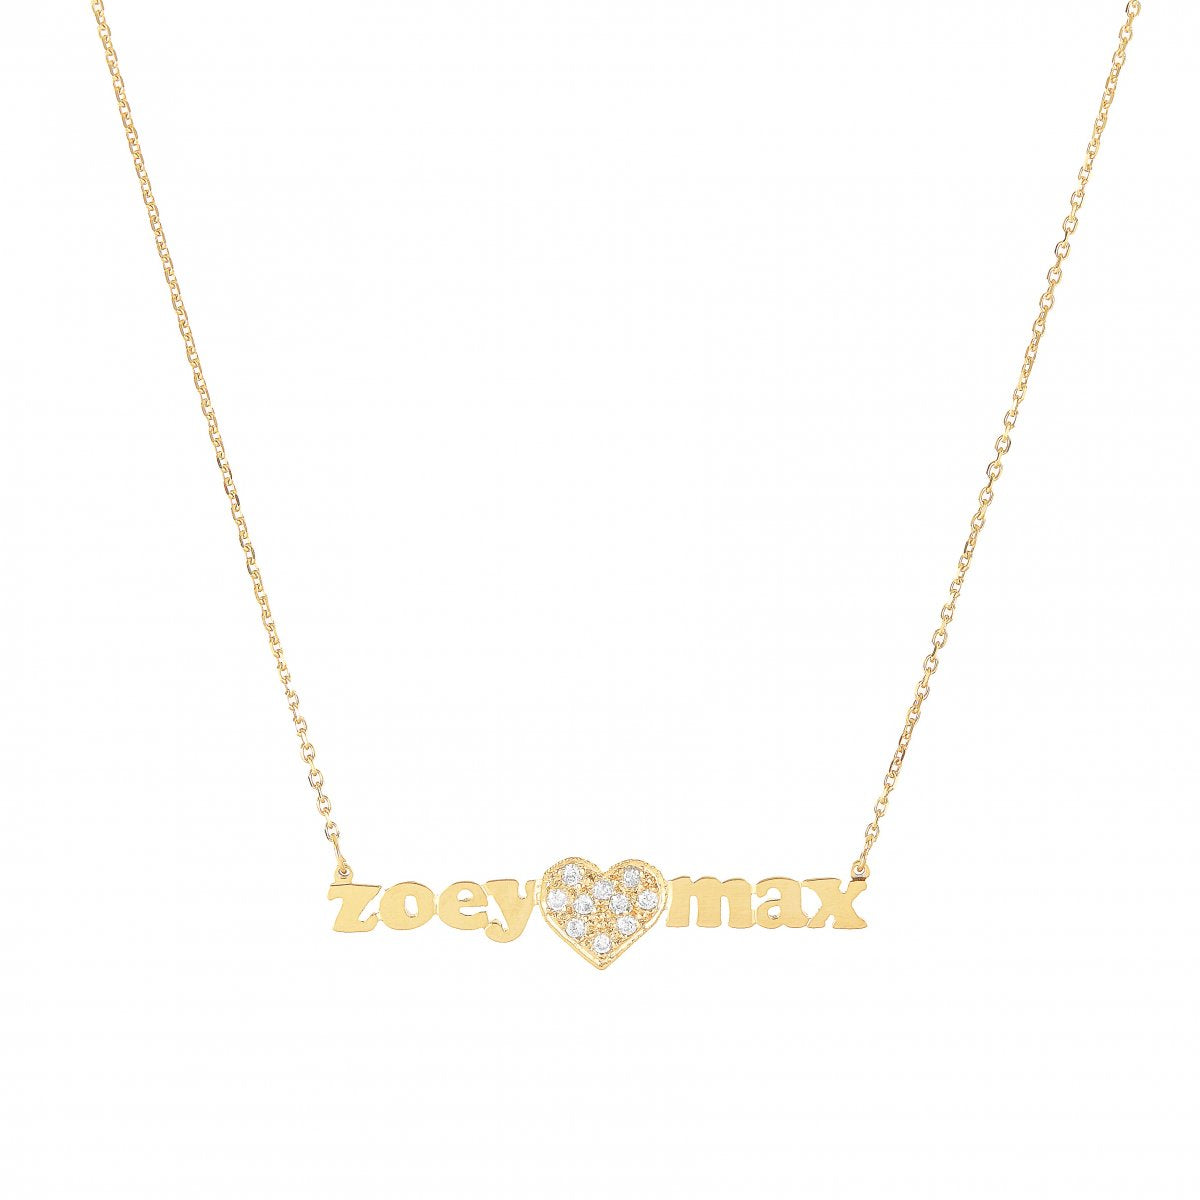 Mini Me Large Diamond Heart - Tiny Gold Name Necklace With Diamond Heart In Center - Lola James Jewelry